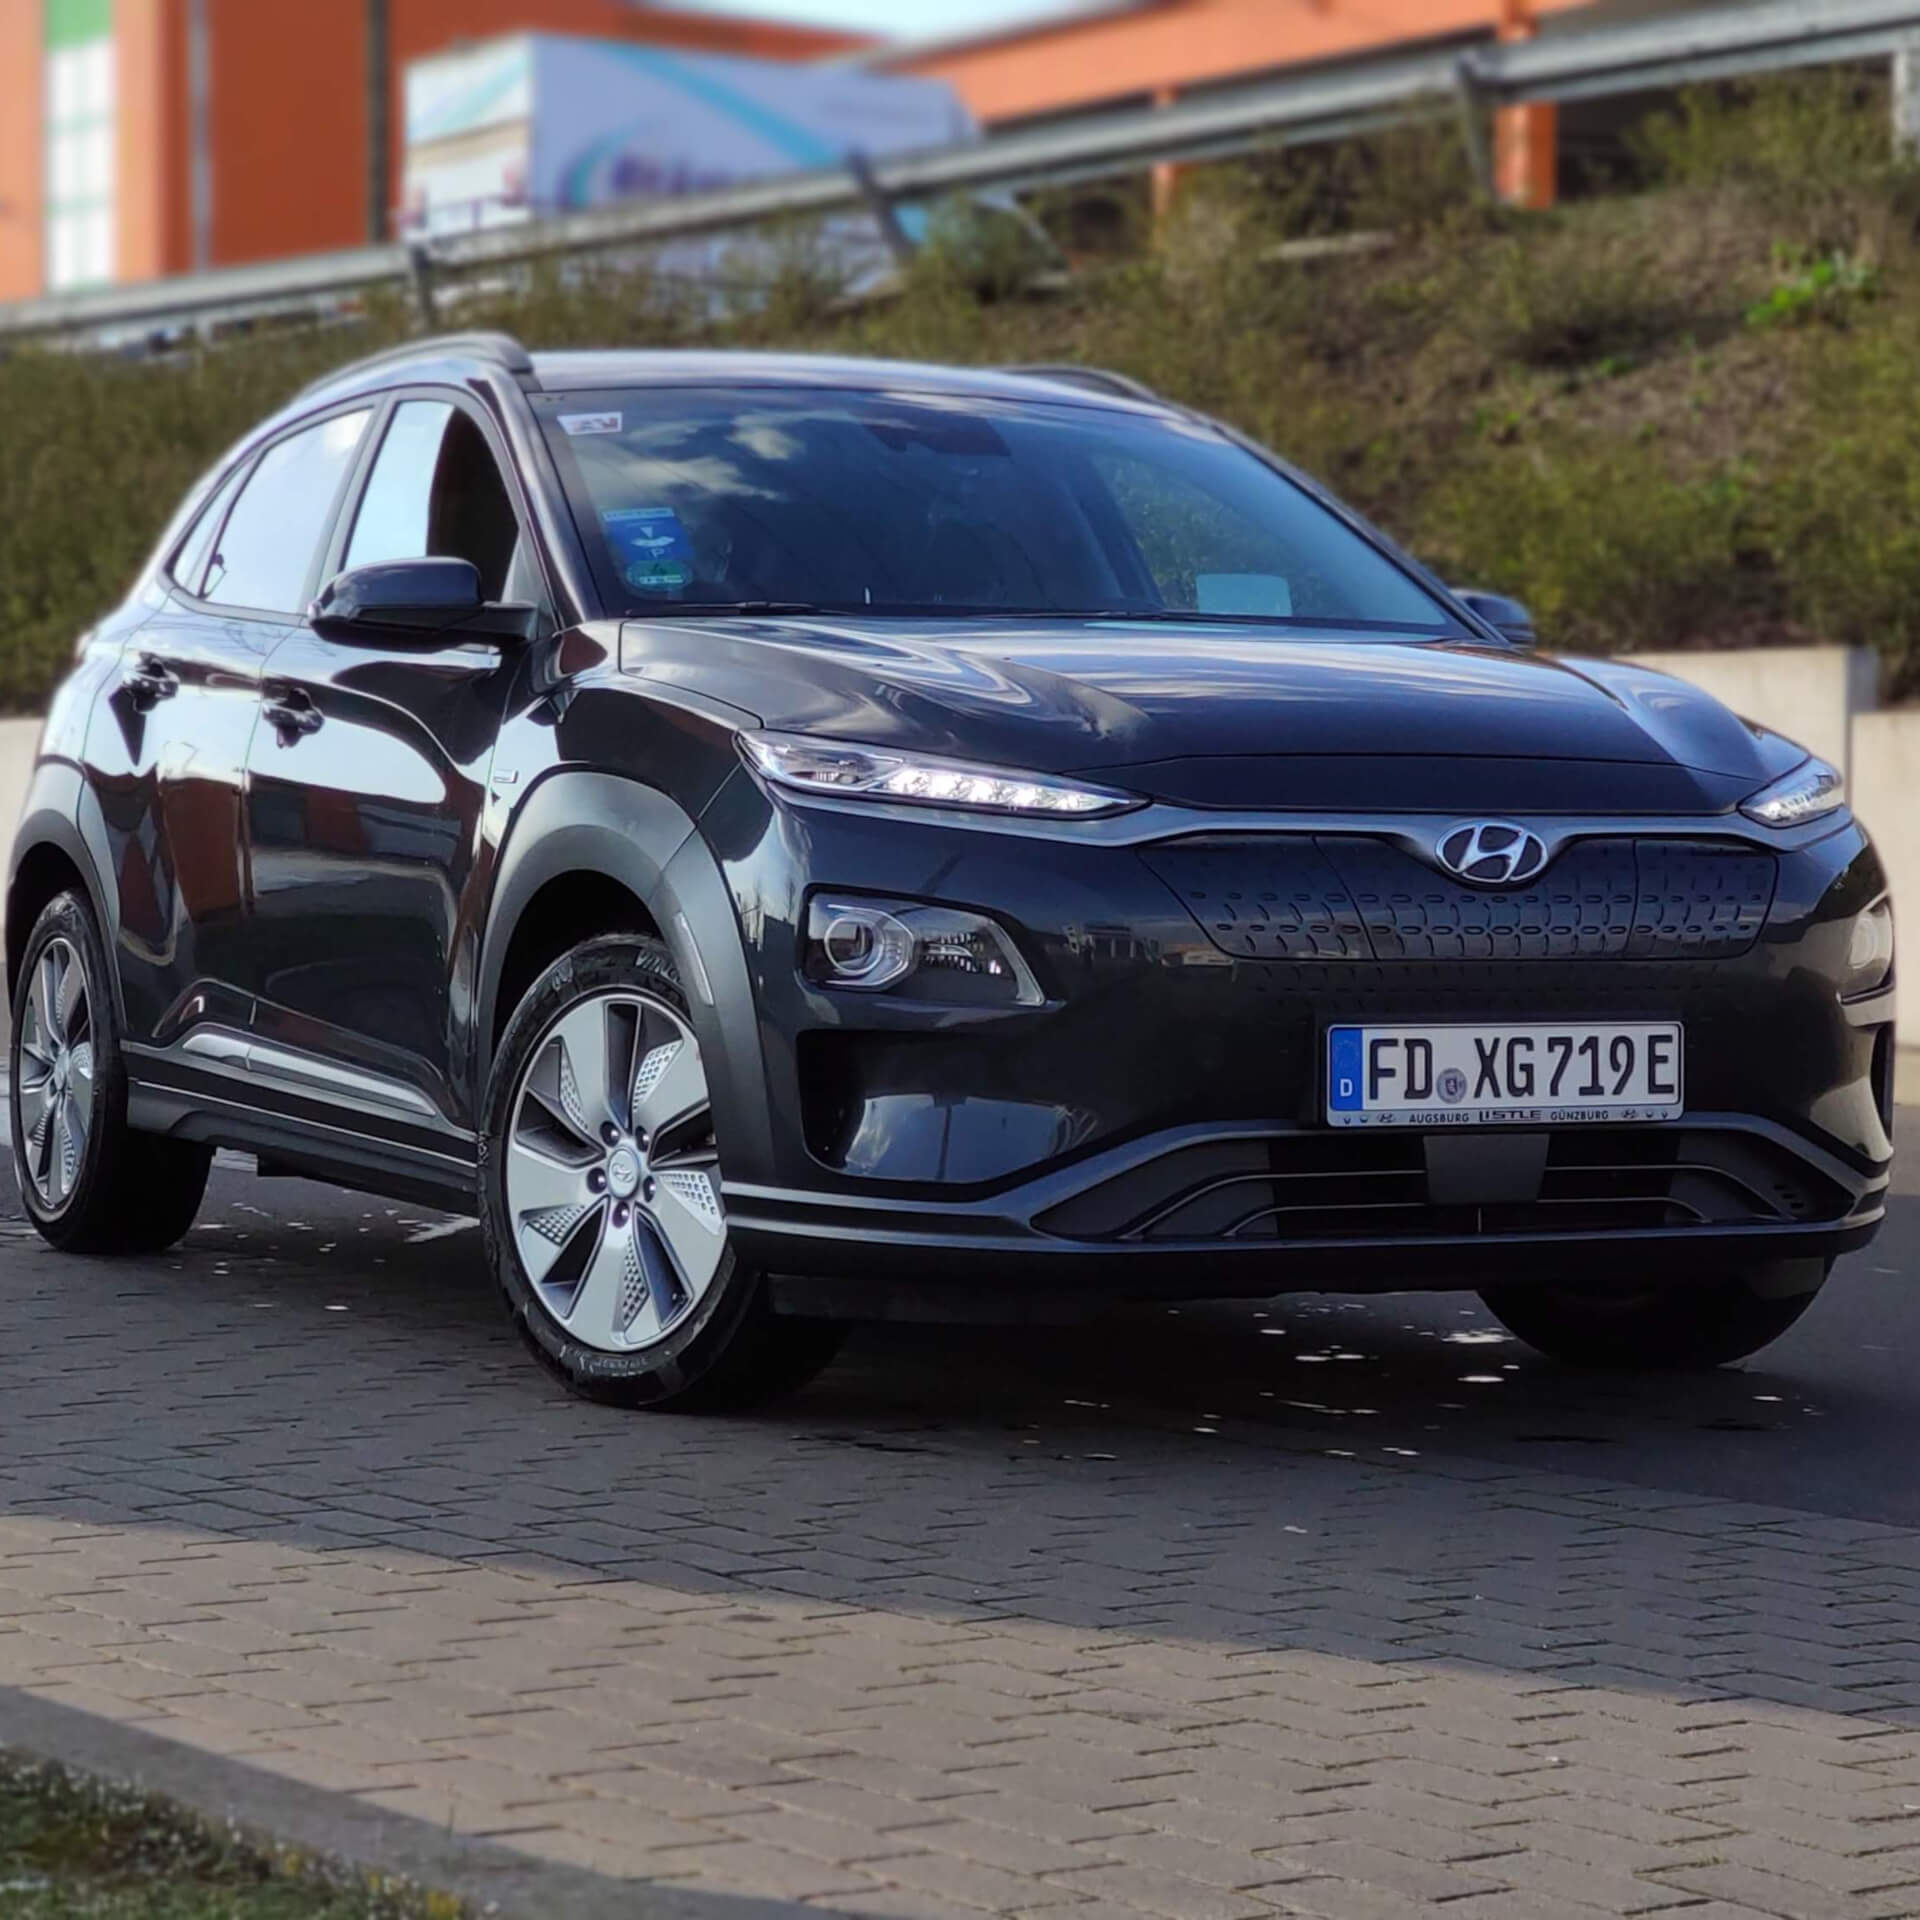 Direct4x4 accessories for Hyundai Kona vehicles with a photo of a black Hyundai Kona parked next to a road